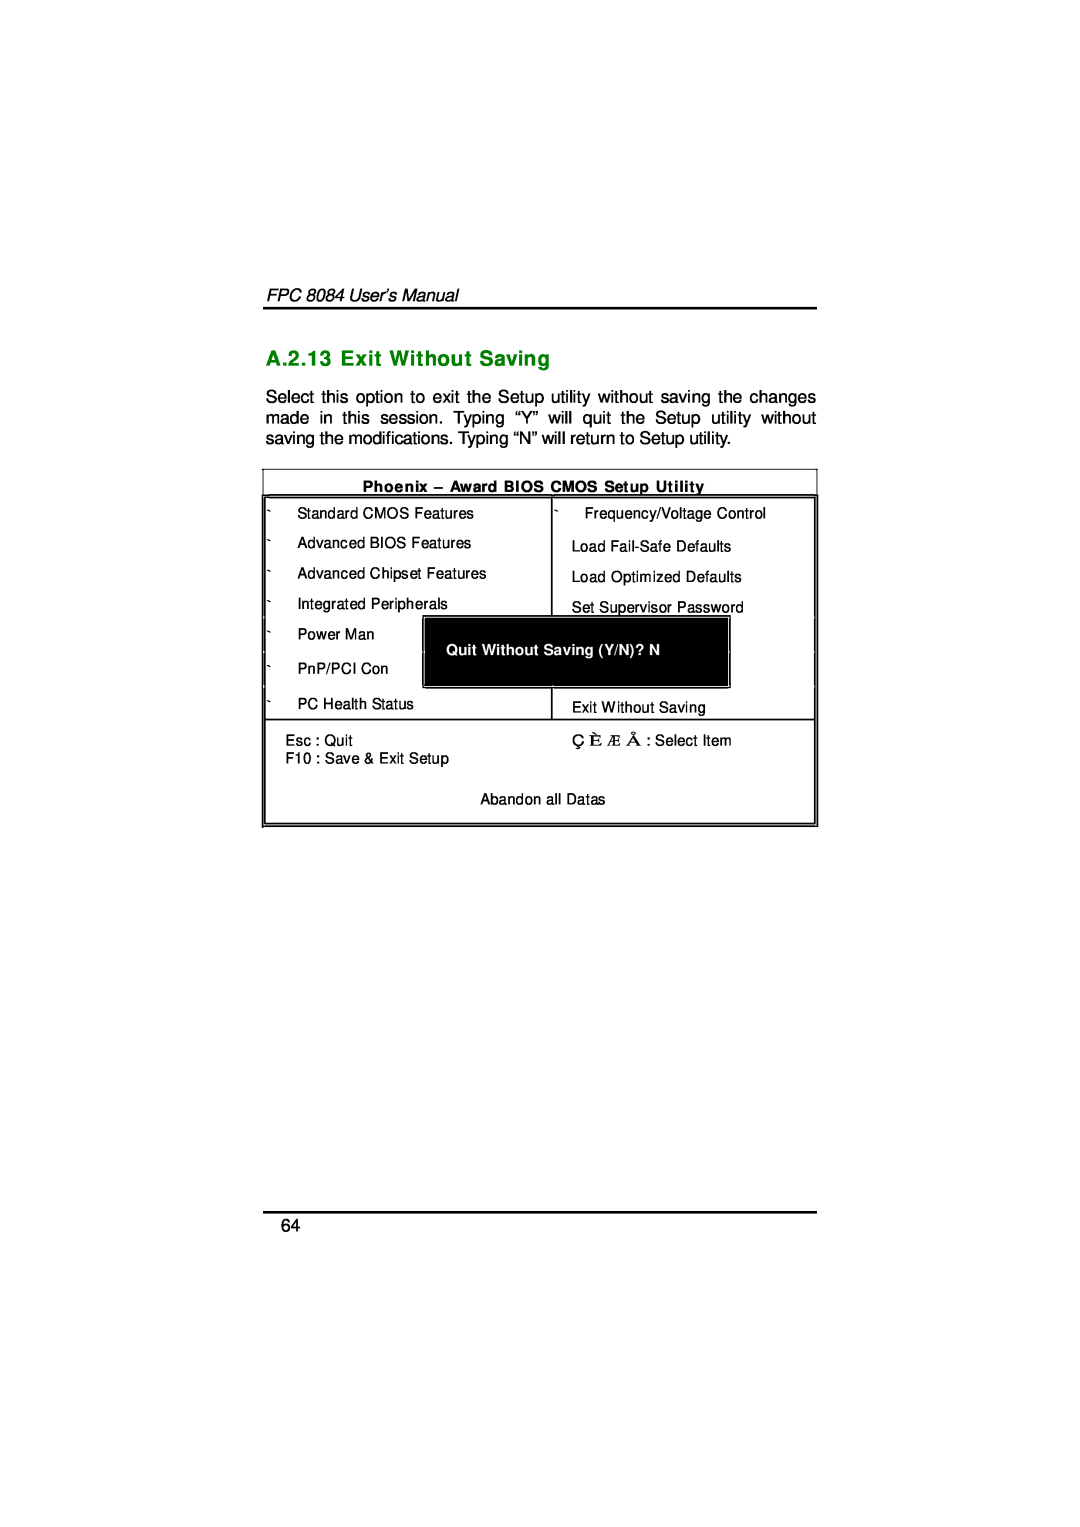 Acnodes user manual A.2.13 Exit Without Saving, FPC 8084 User’s Manual 